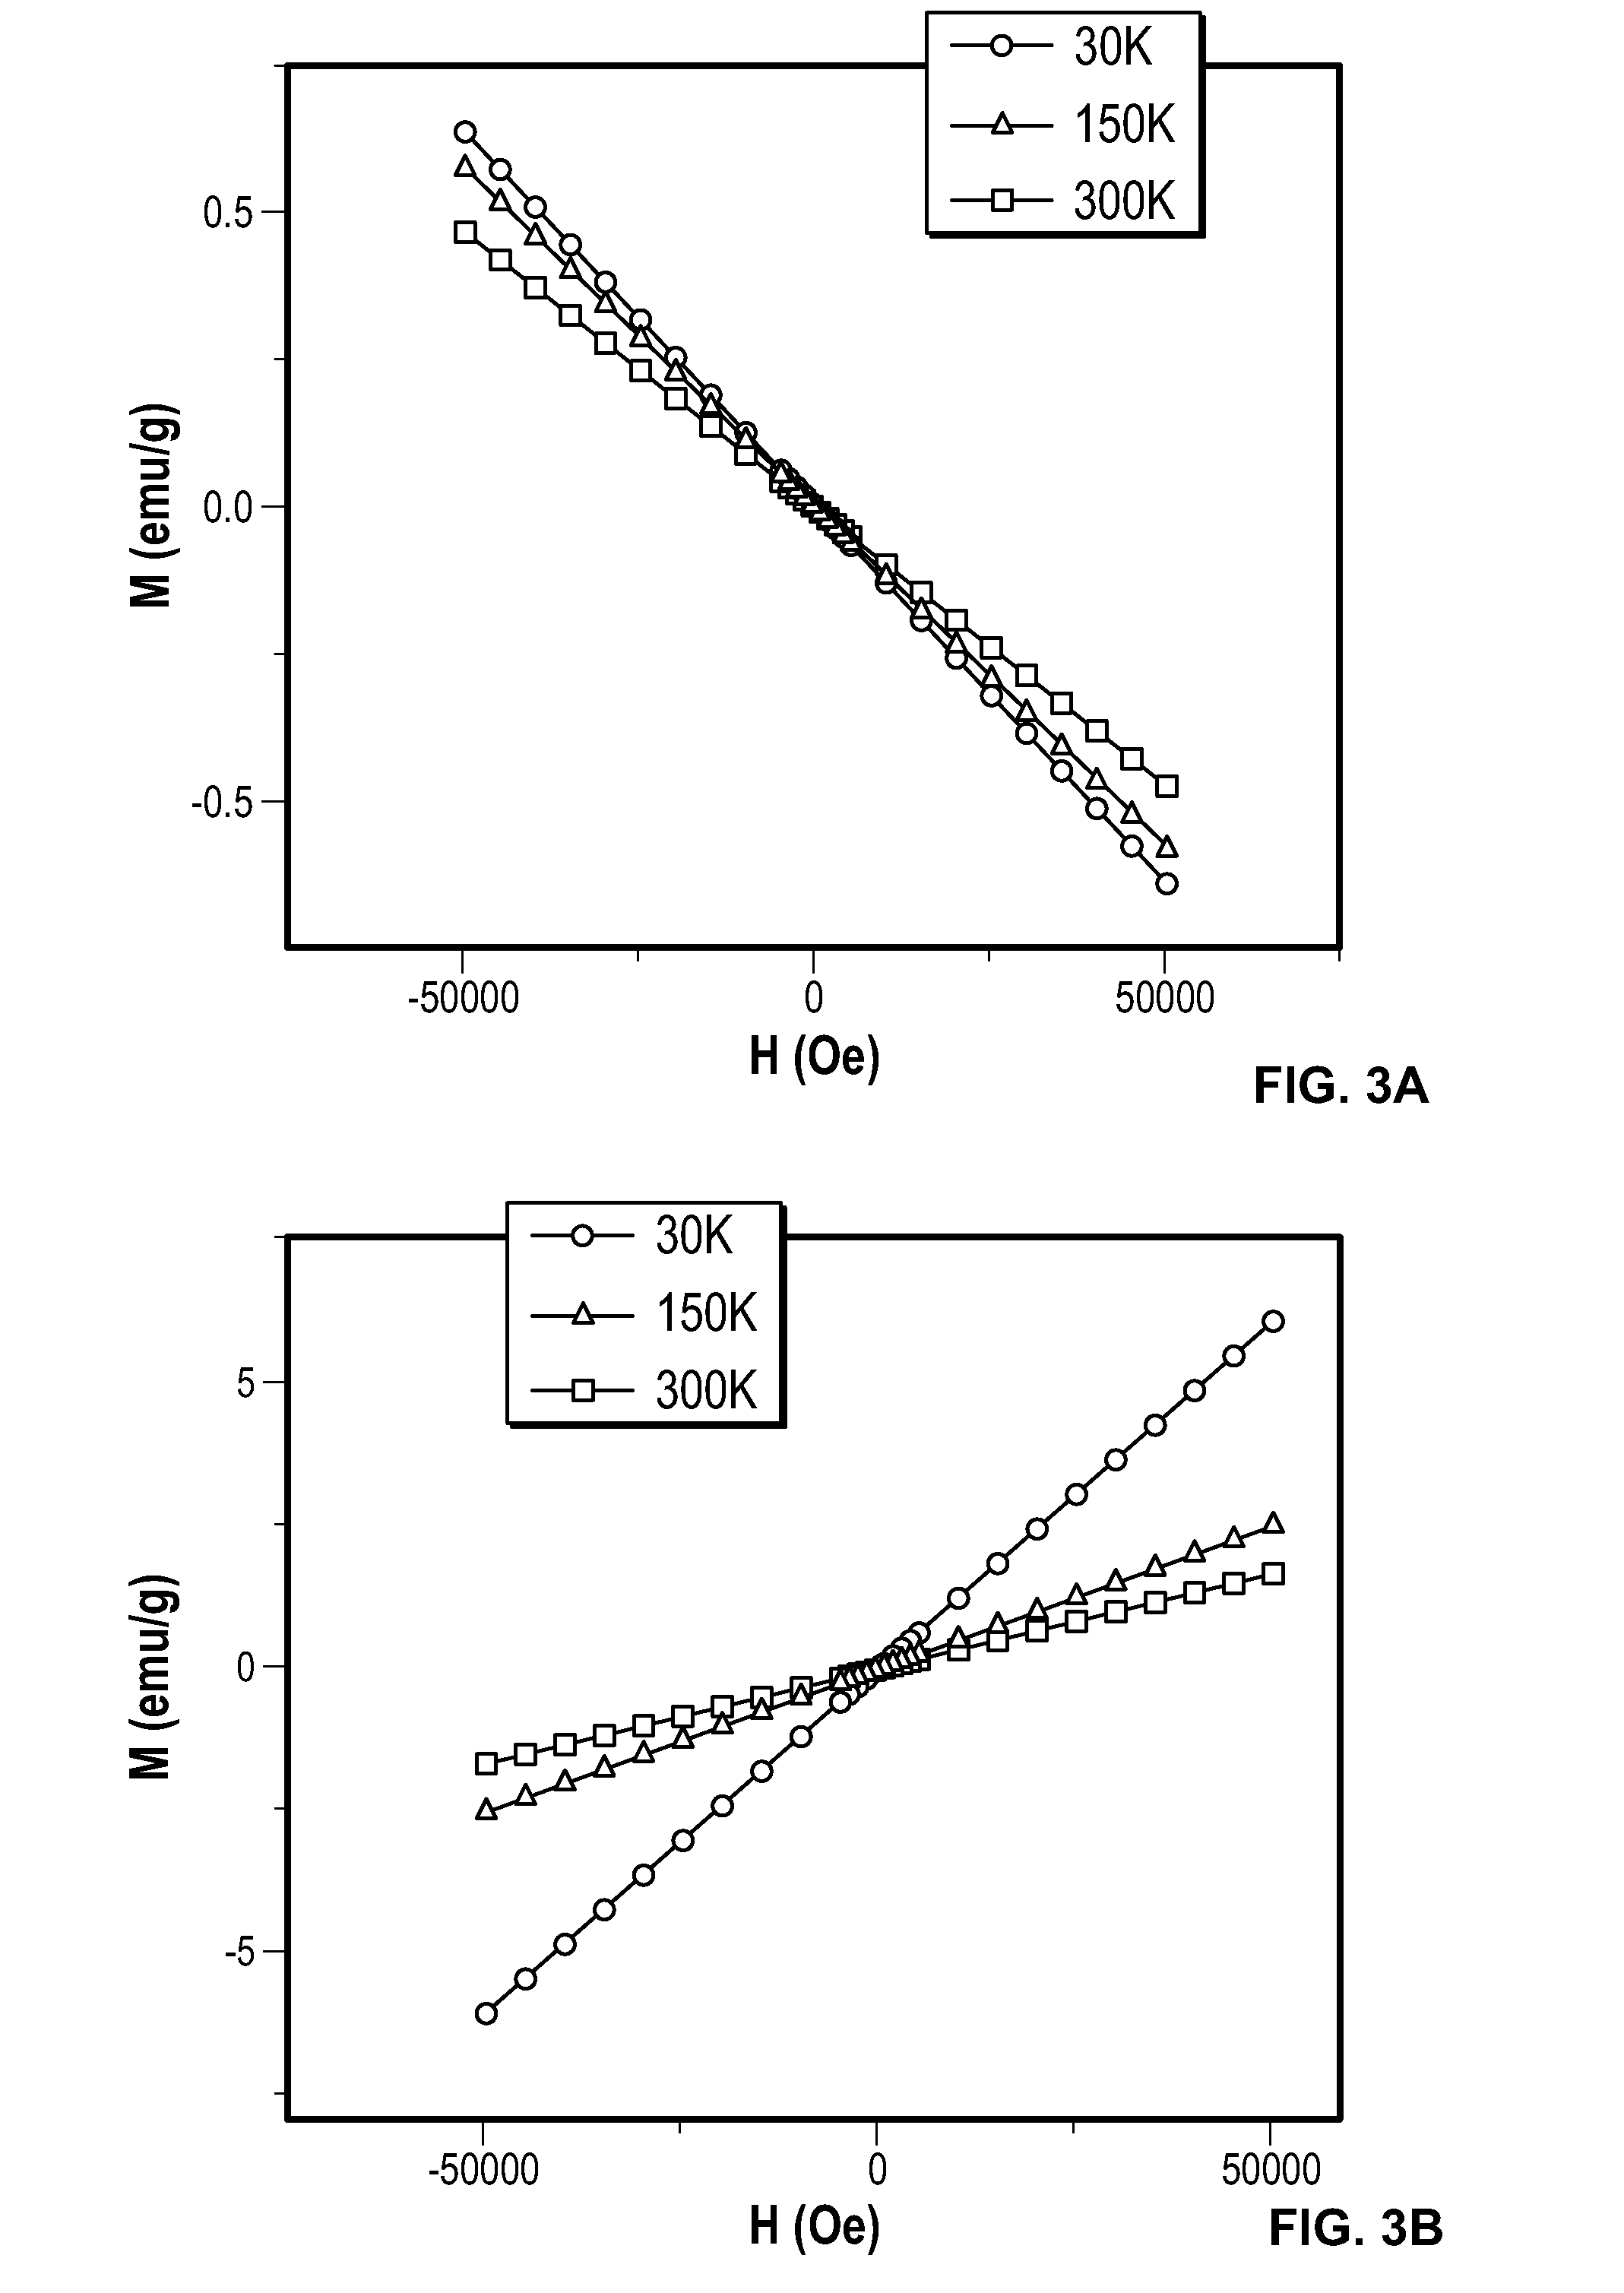 Magnetic graphene-like nanoparticles or graphitic nano- or microparticles and method of production and uses thereof